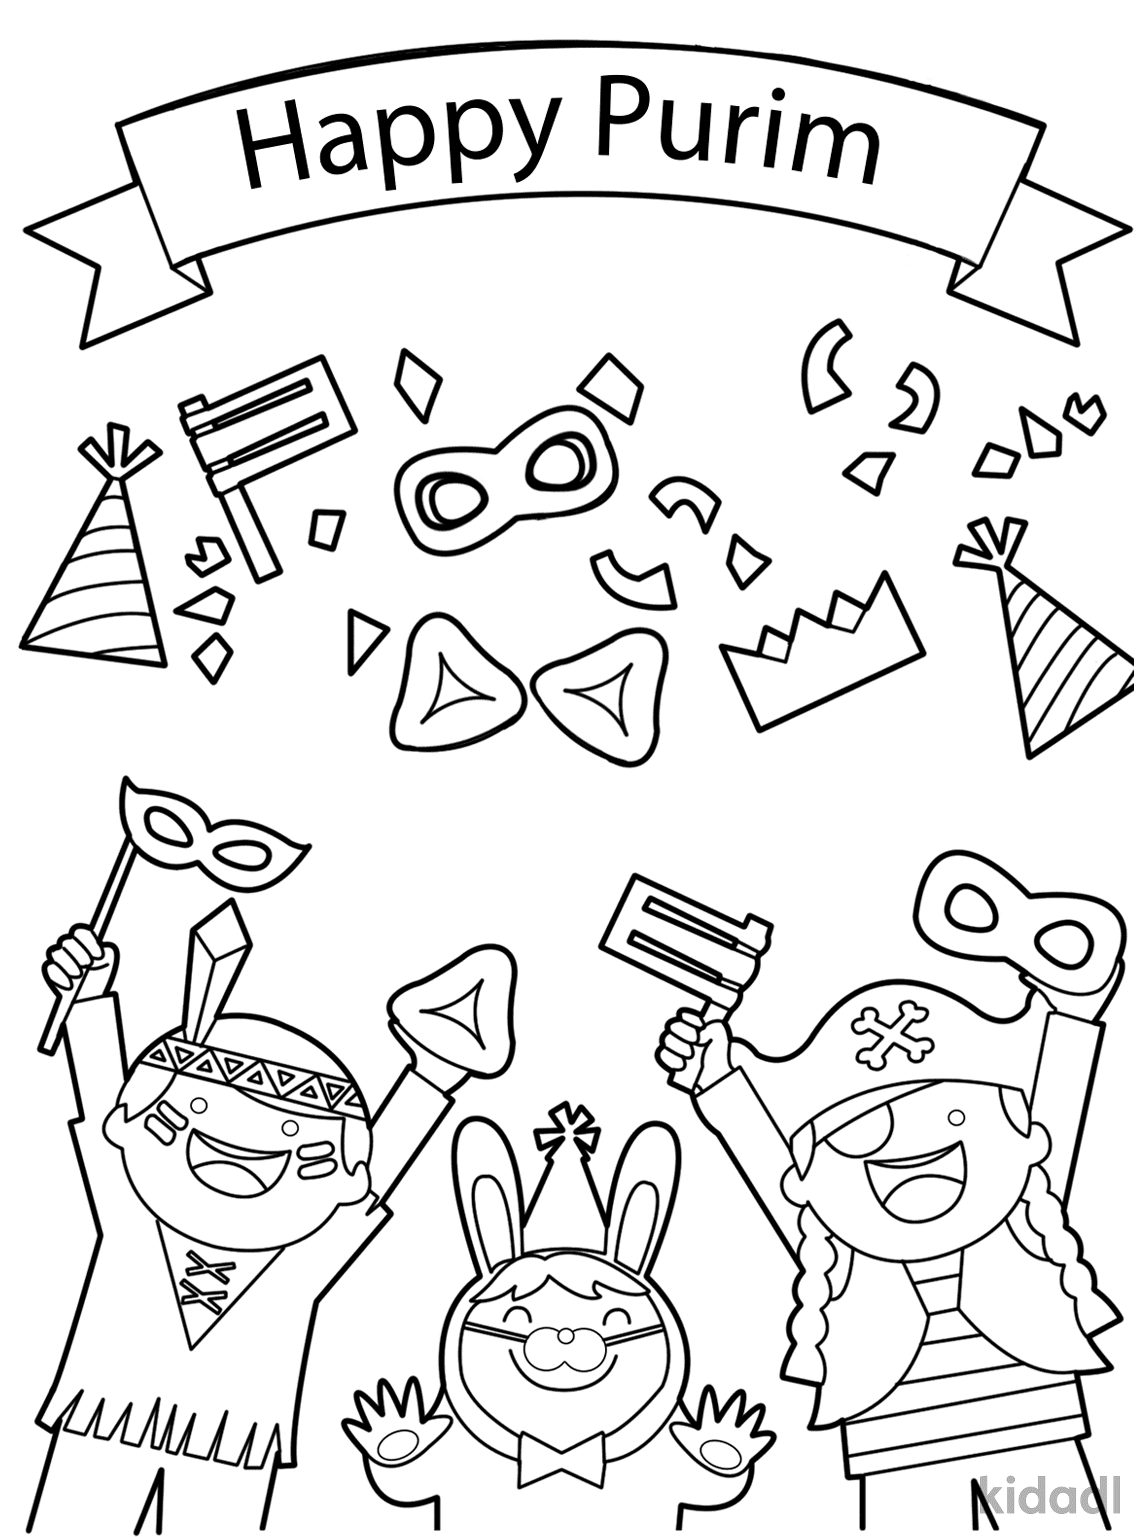 Happy Purim for Childrens Coloring Page